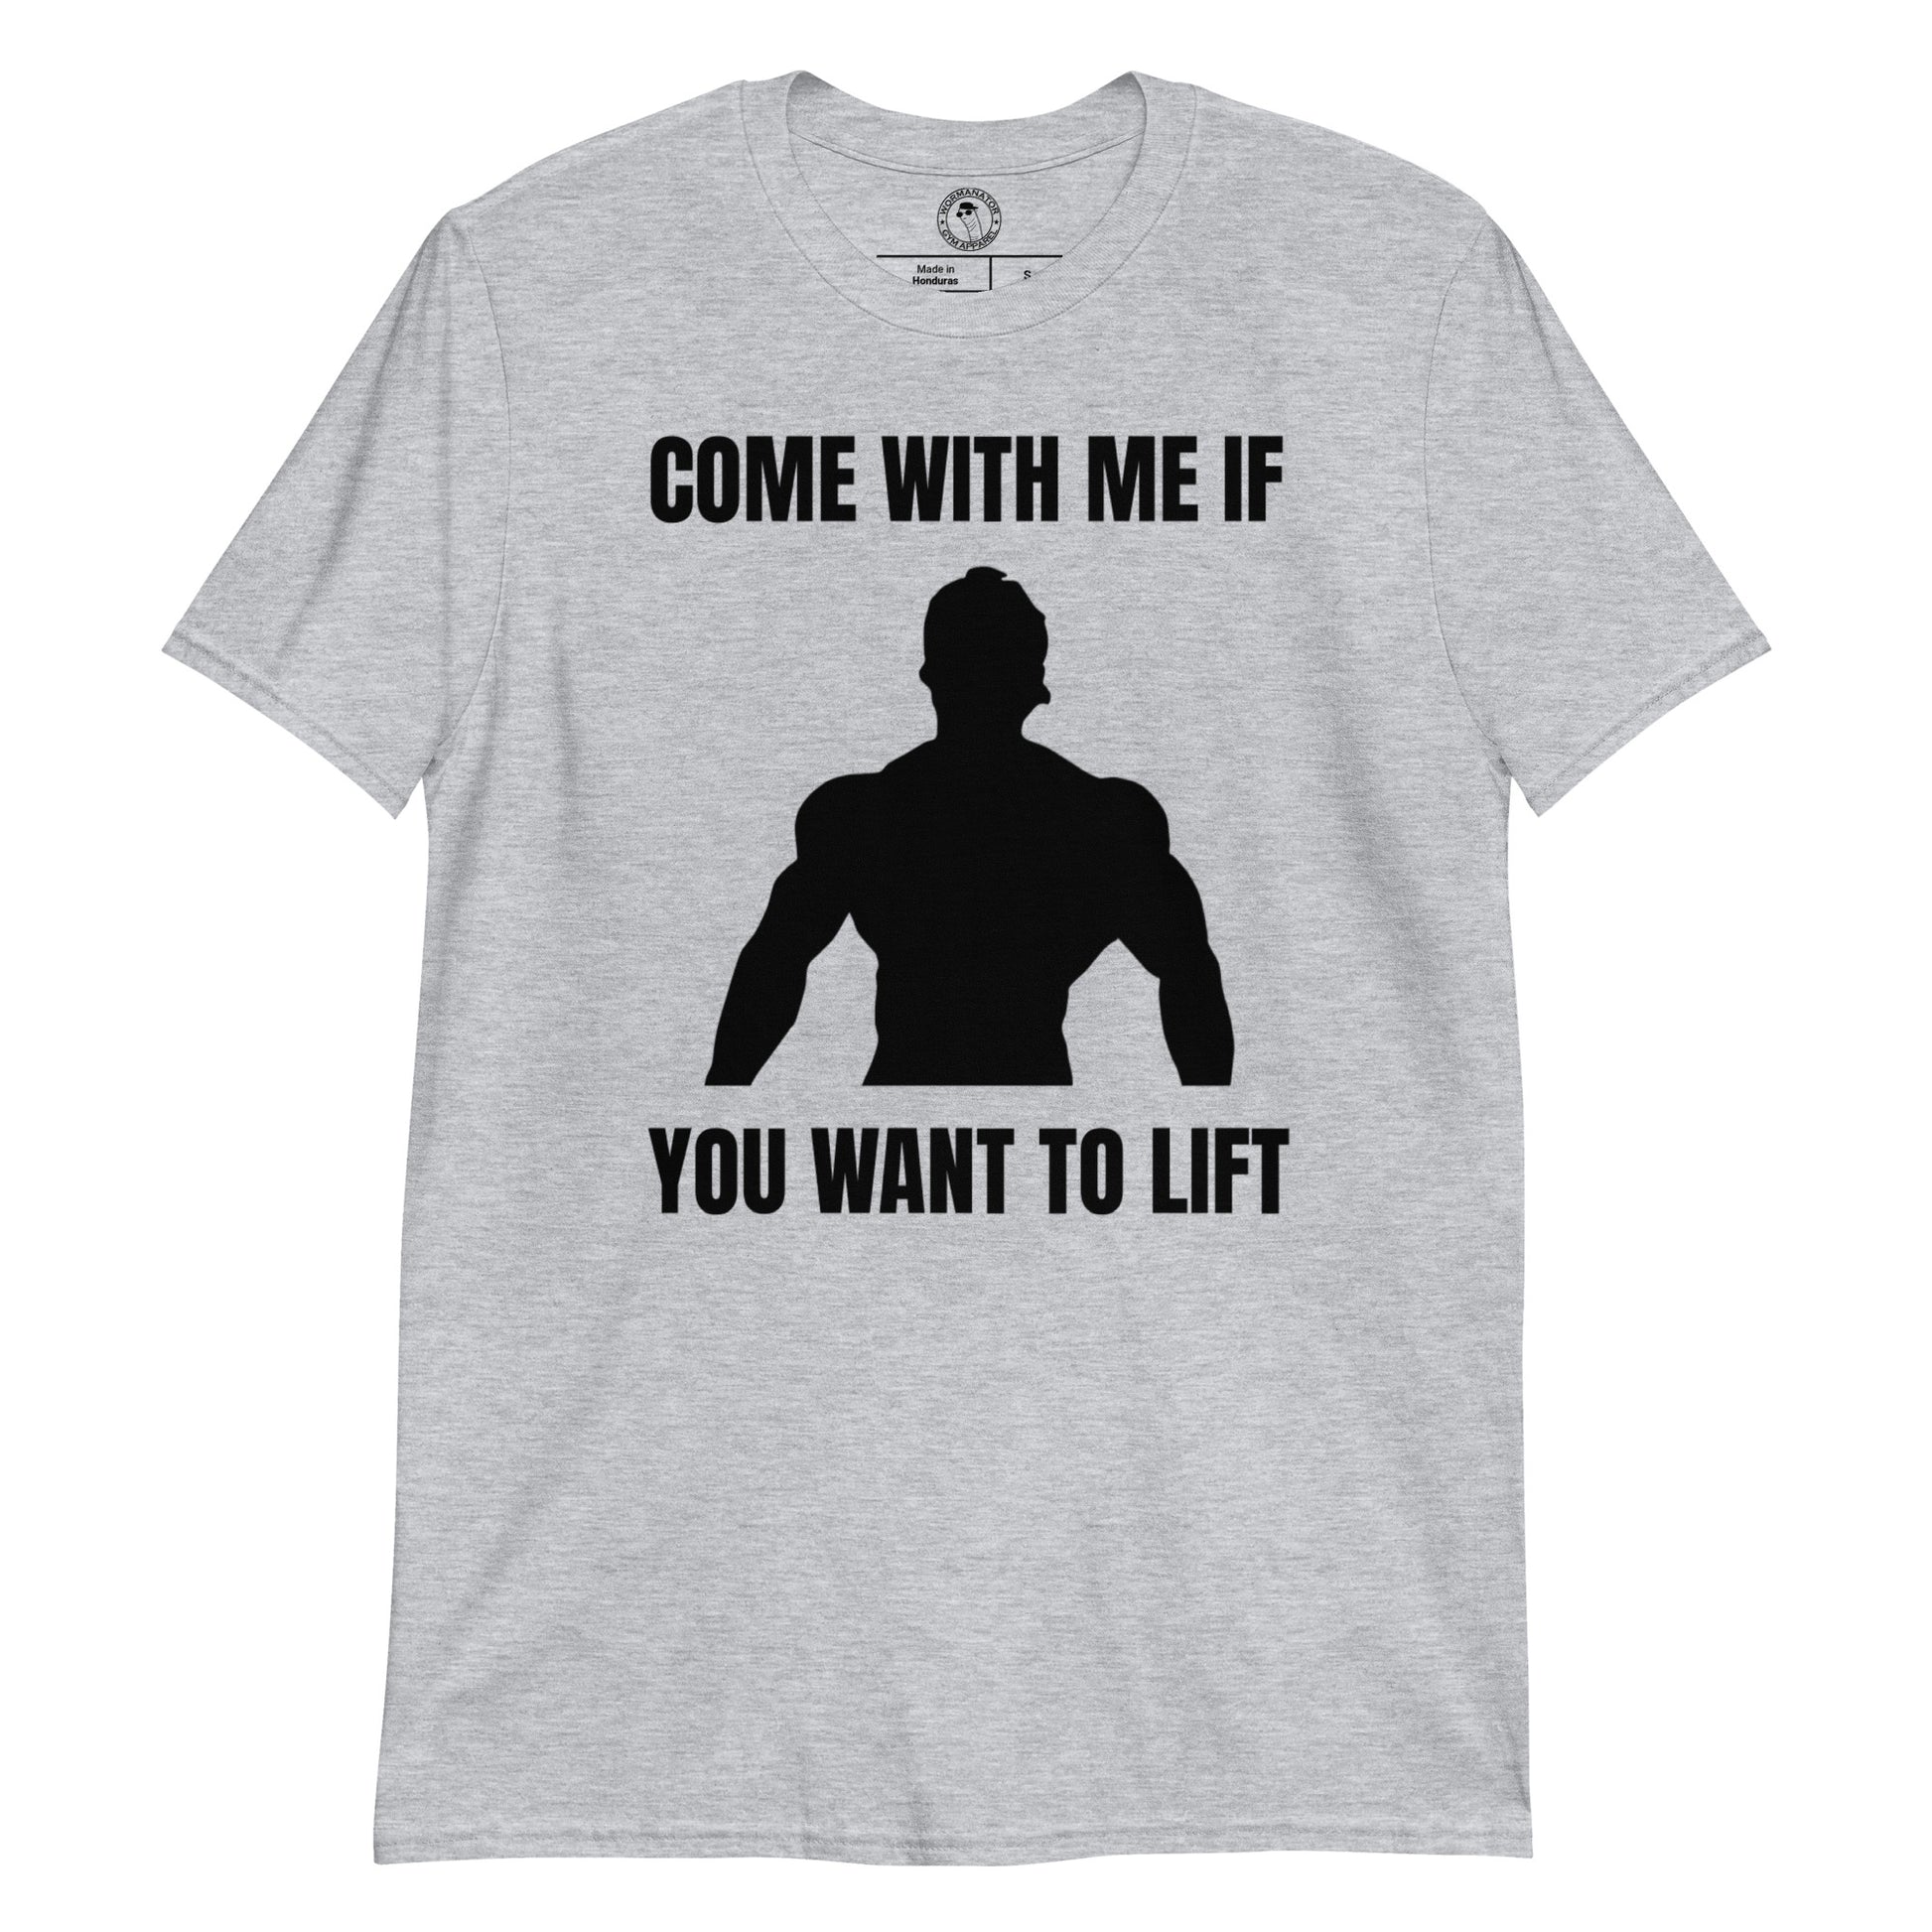 Come with Me if You Want to Lift Shirt in Sport Grey